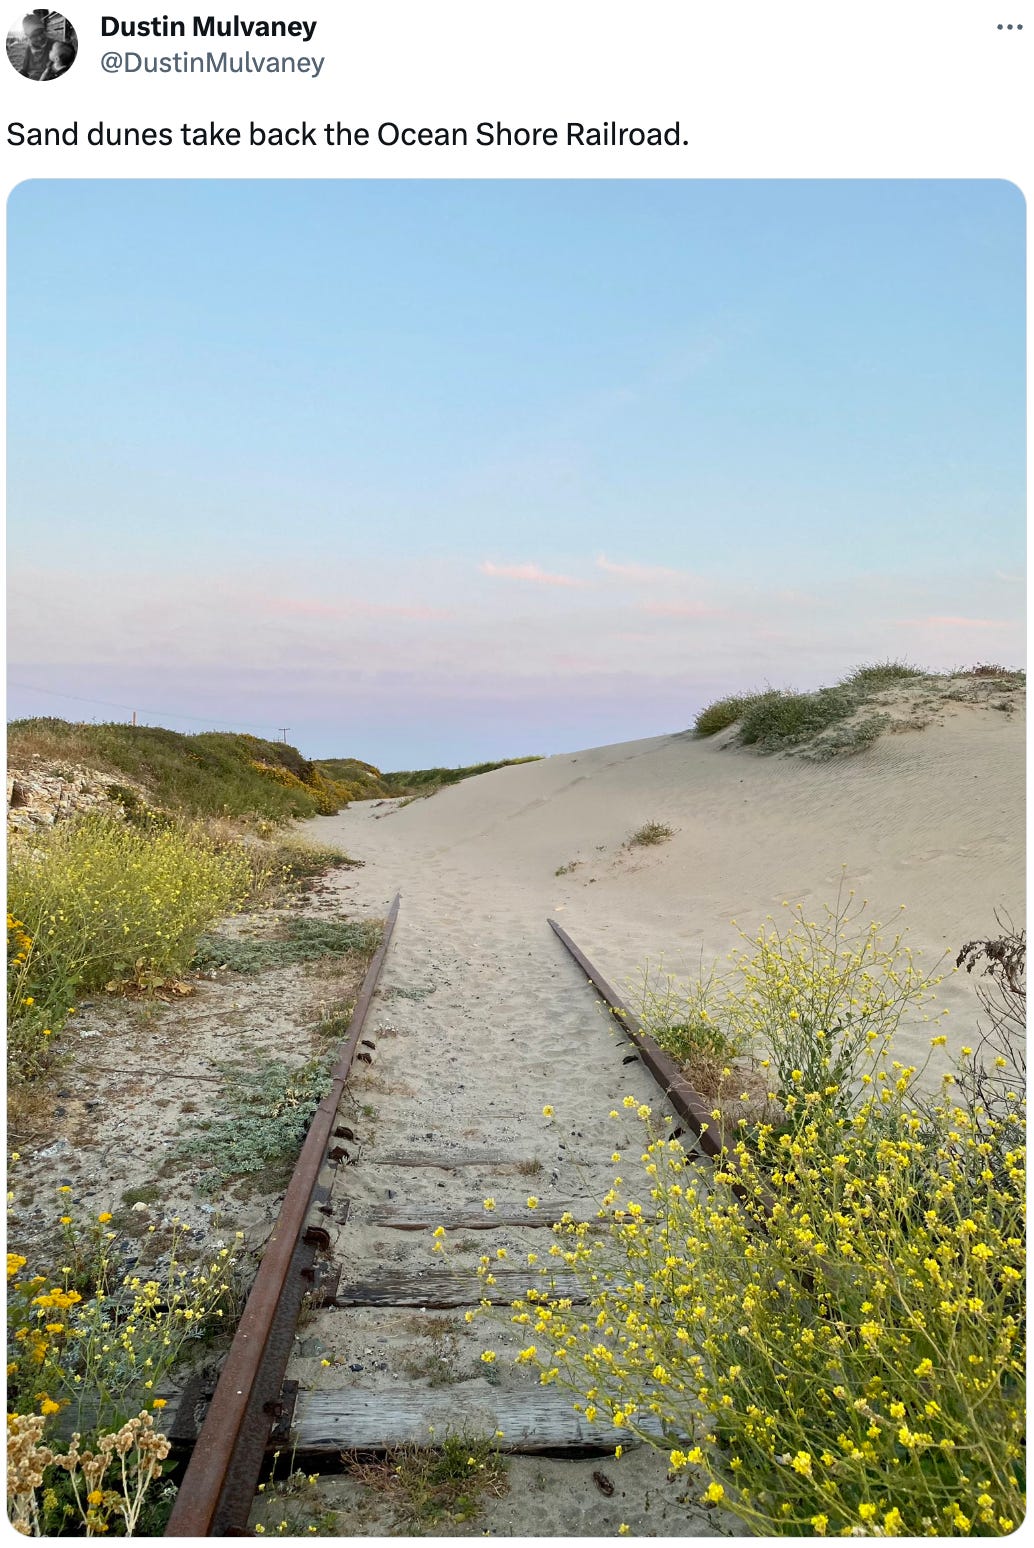  See new Tweets Conversation Dustin Mulvaney @DustinMulvaney Sand dunes take back the Ocean Shore Railroad.